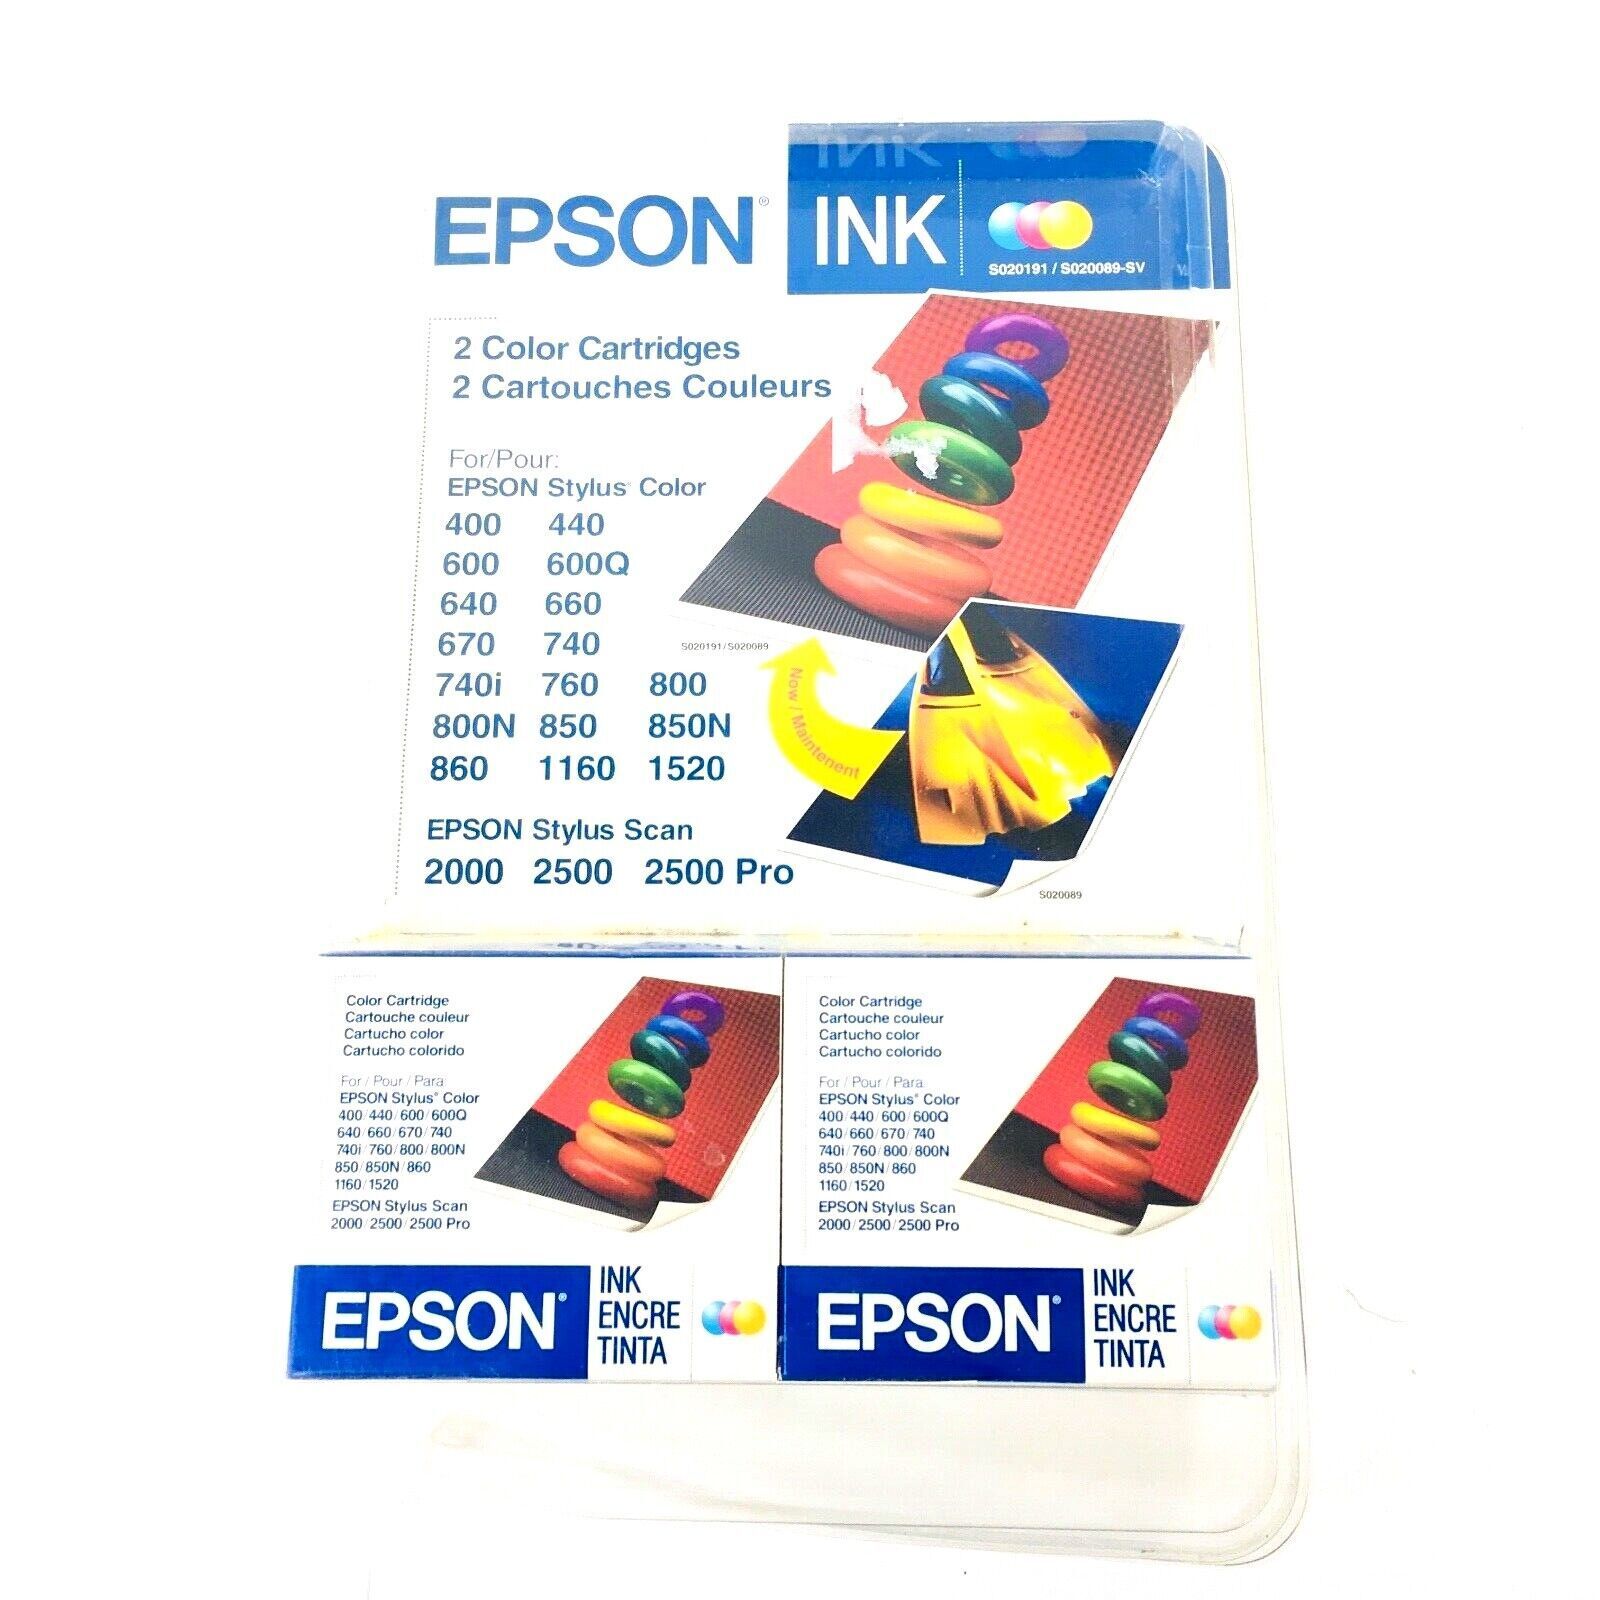 Epson Ink Two Colored Cartridges S020191/S020089